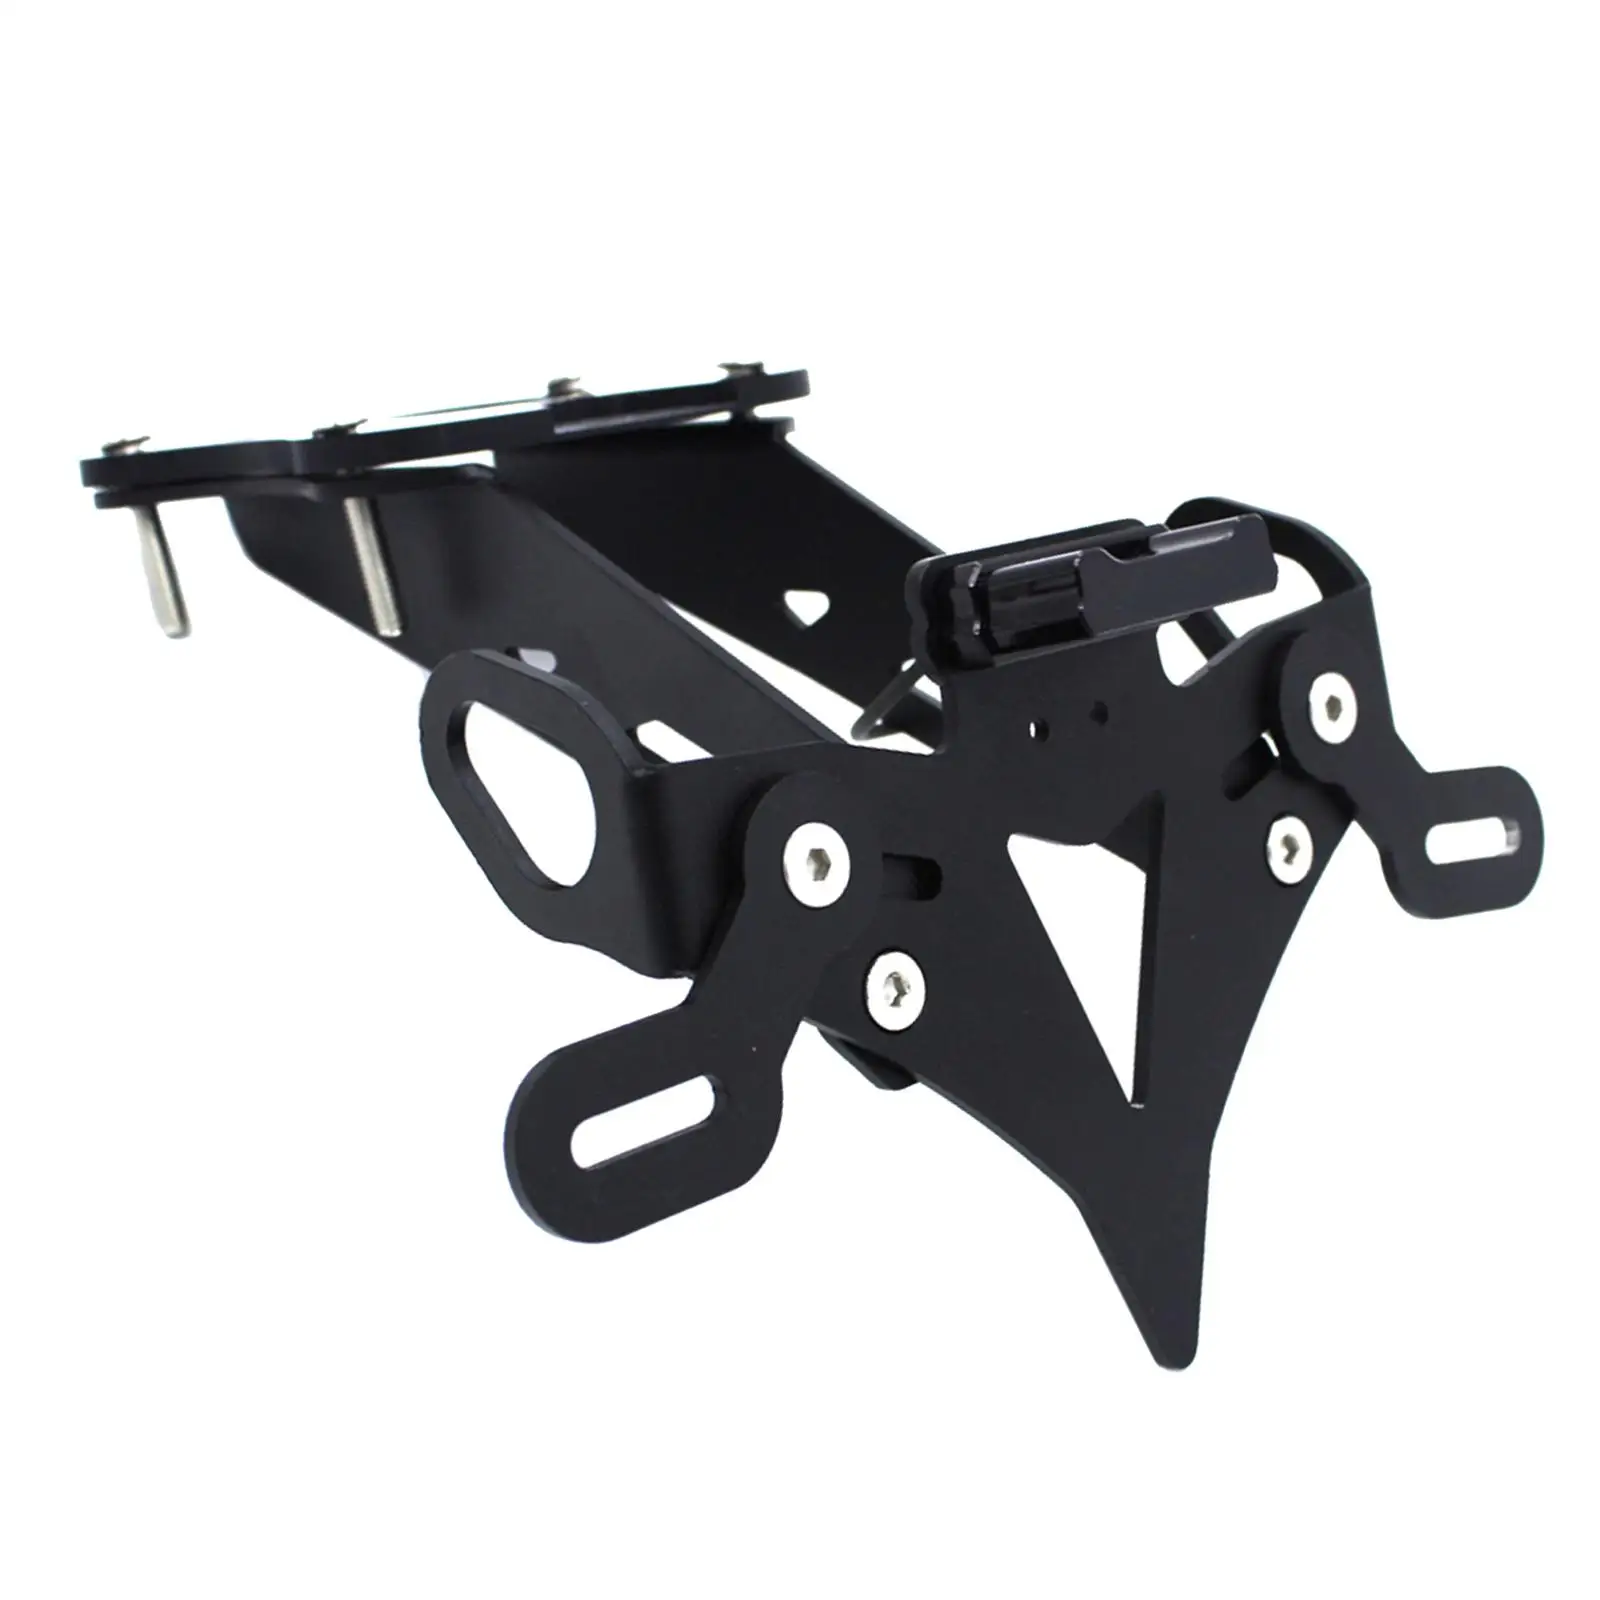 License Plate Holder Replacement Easy to Install Body Frame Tail Mount Parts Rear Fender Bracket for Yamaha MT09 Motorbike